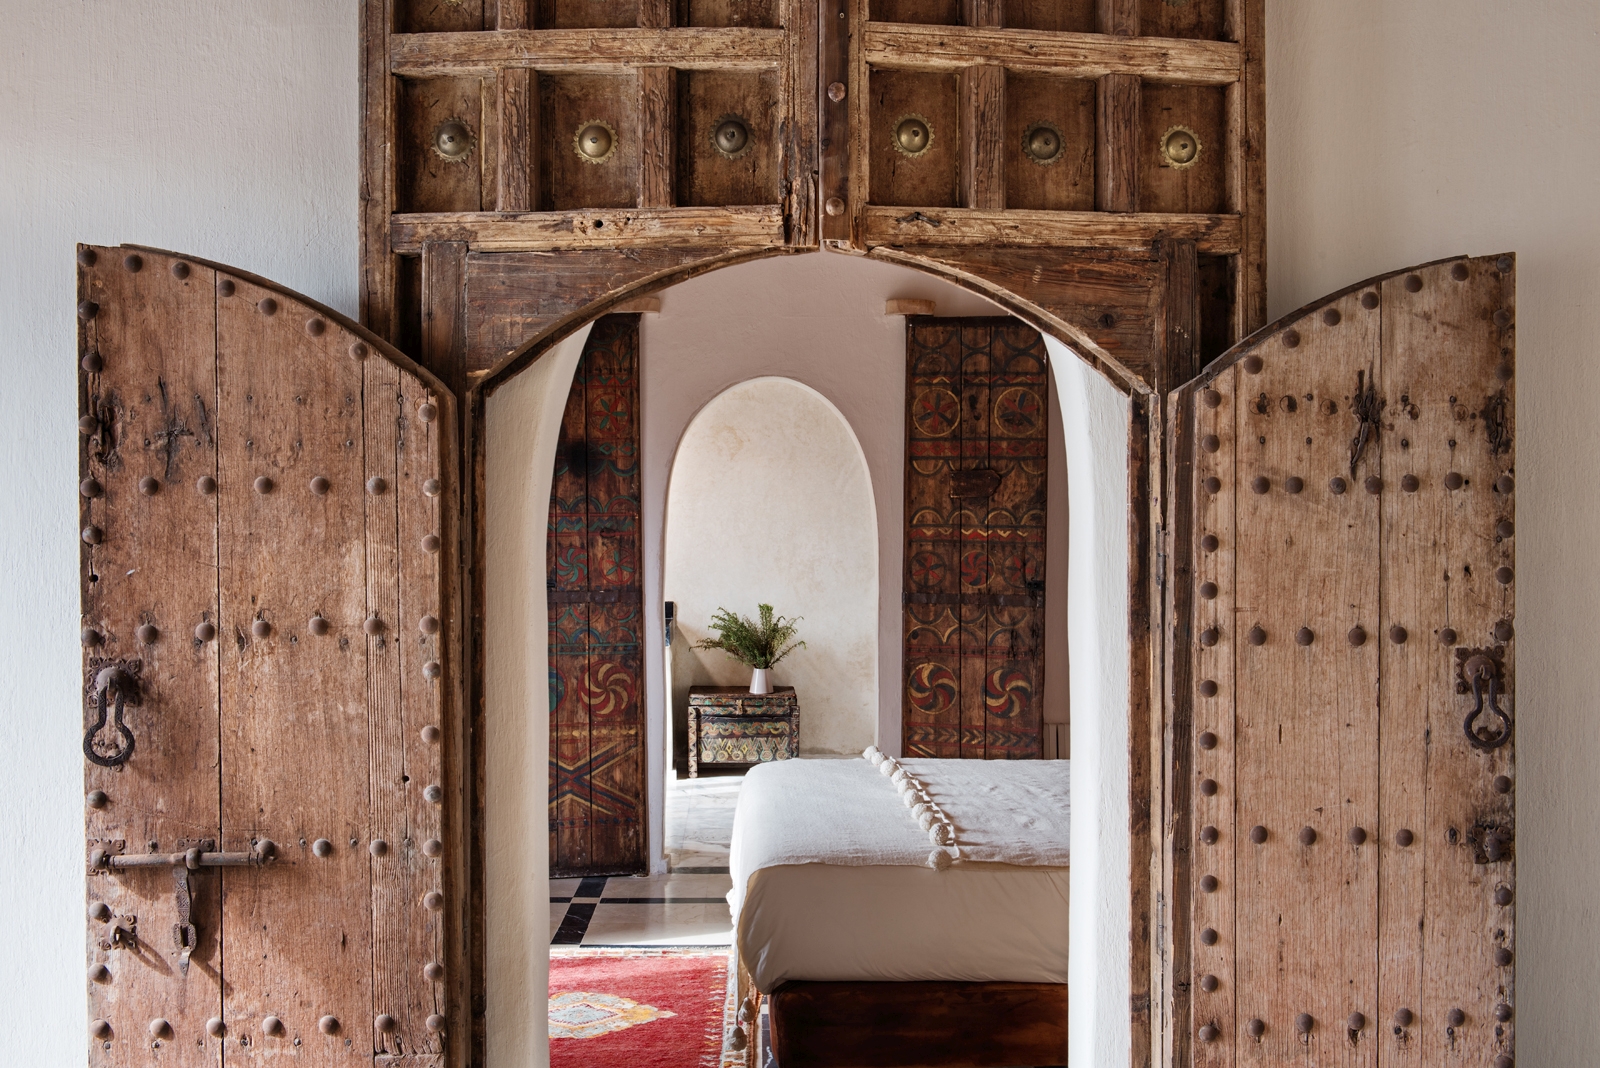 Artisically carved door frame leading to a bedroom